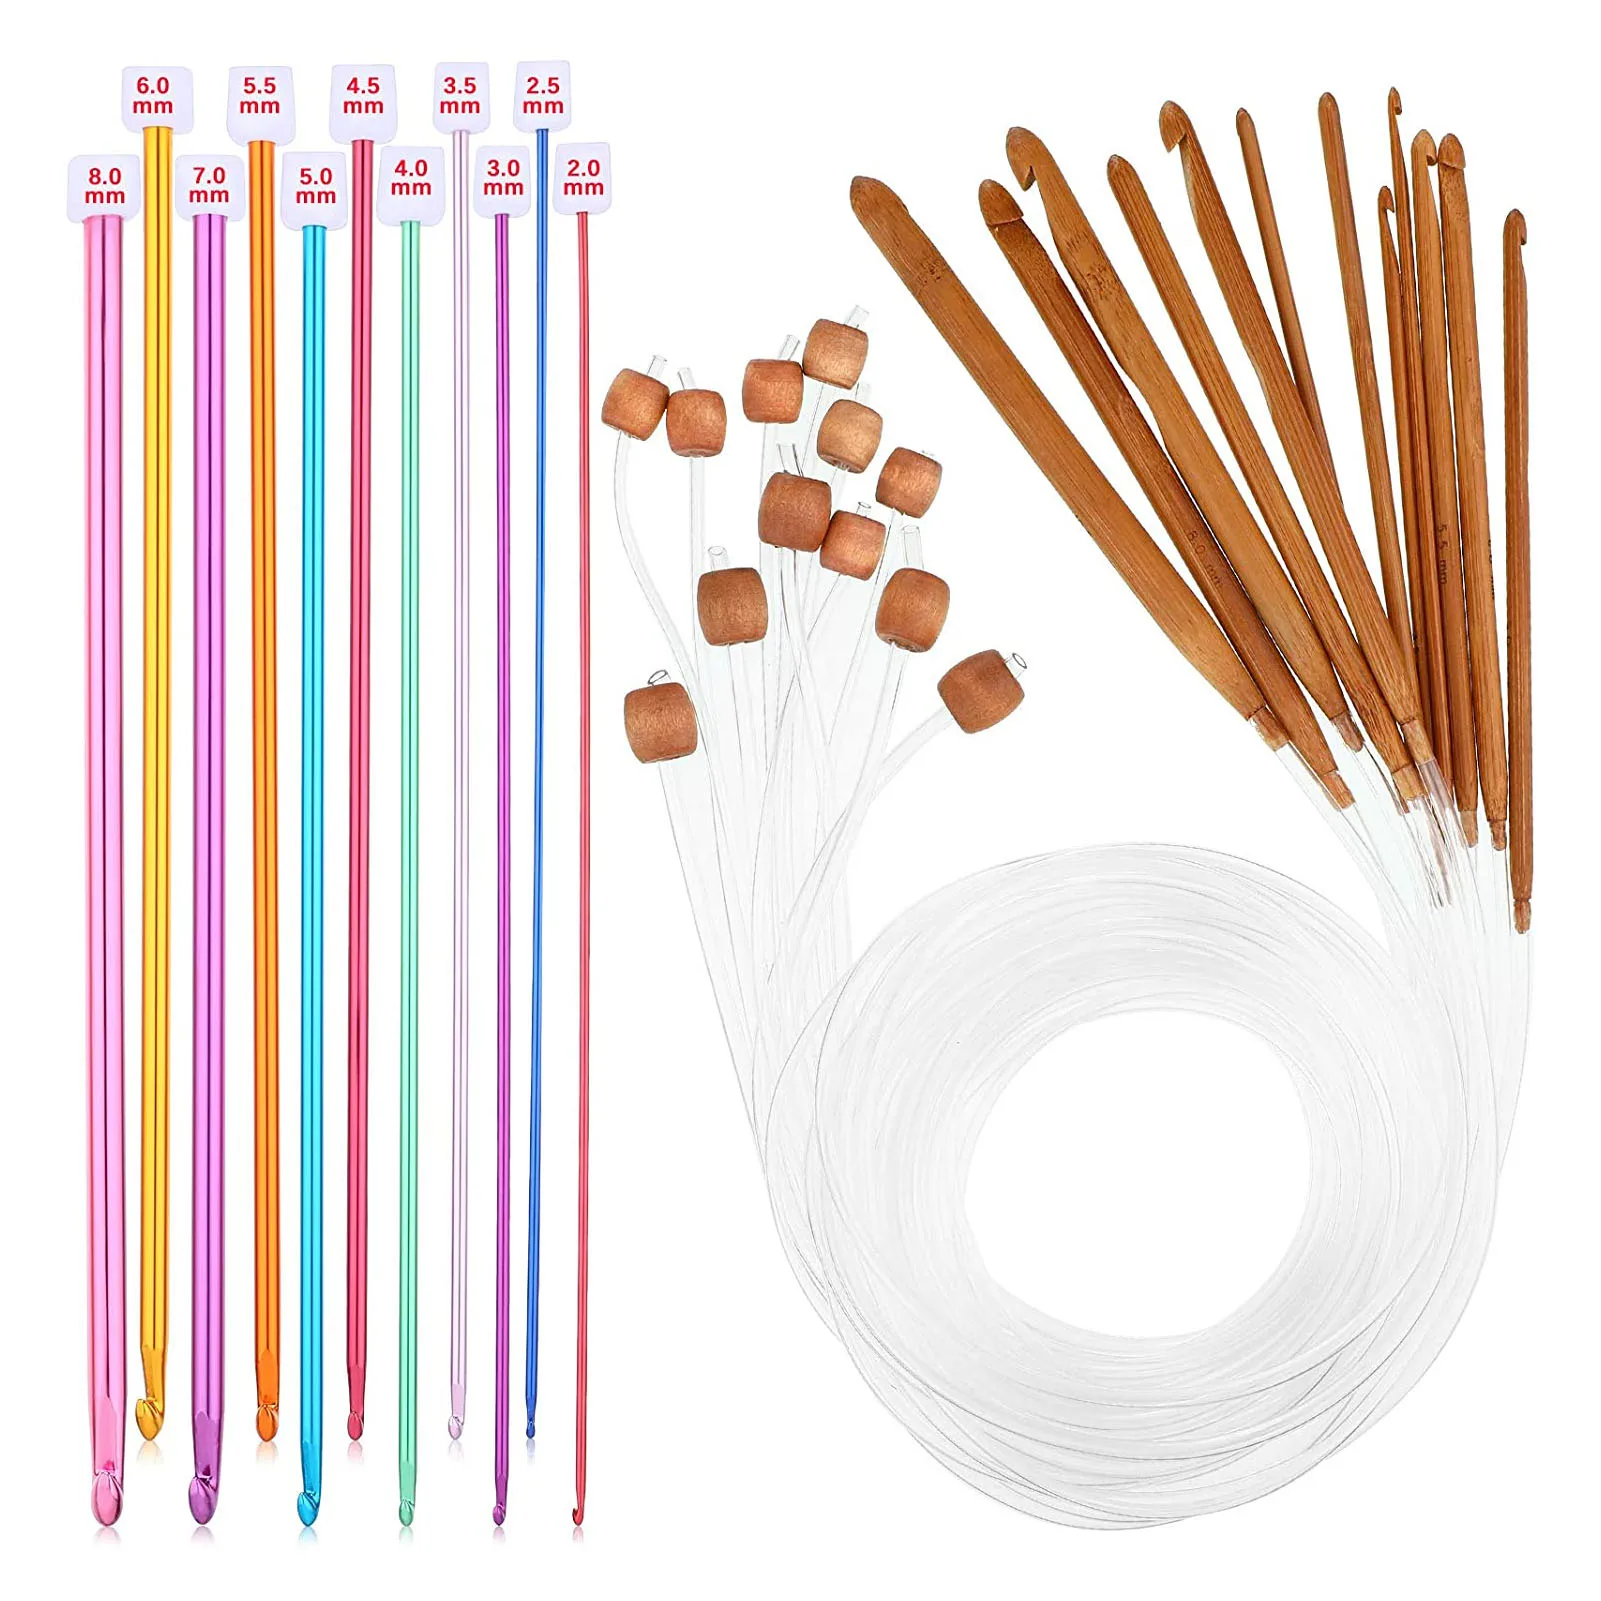 23PCS Tunisian Crochet Hooks Set 3-10mm Cable Knitting Needle comfortable to hold, flexible to use, various colors of Tunisian